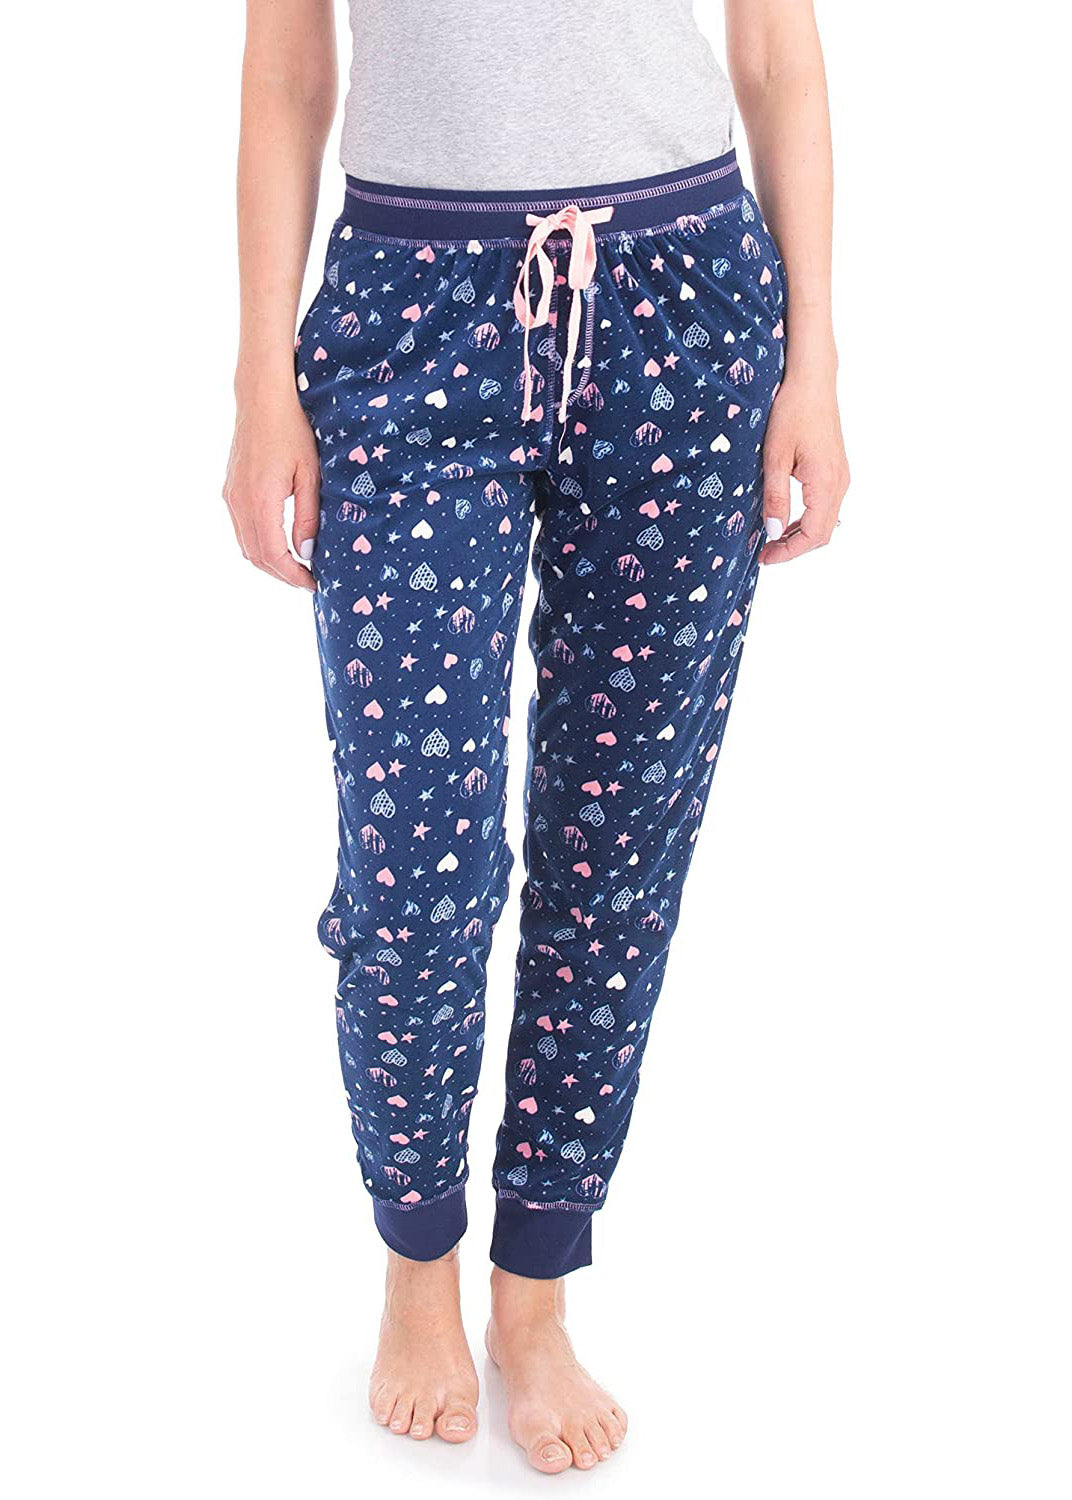 PJ joggers with soft velvety texture, stretch, elastic waistband, drawstring, and stylish ankle cuff. This pattern is a light blue, light pink hearts and starts on a navy background. It features a pink drawstring.